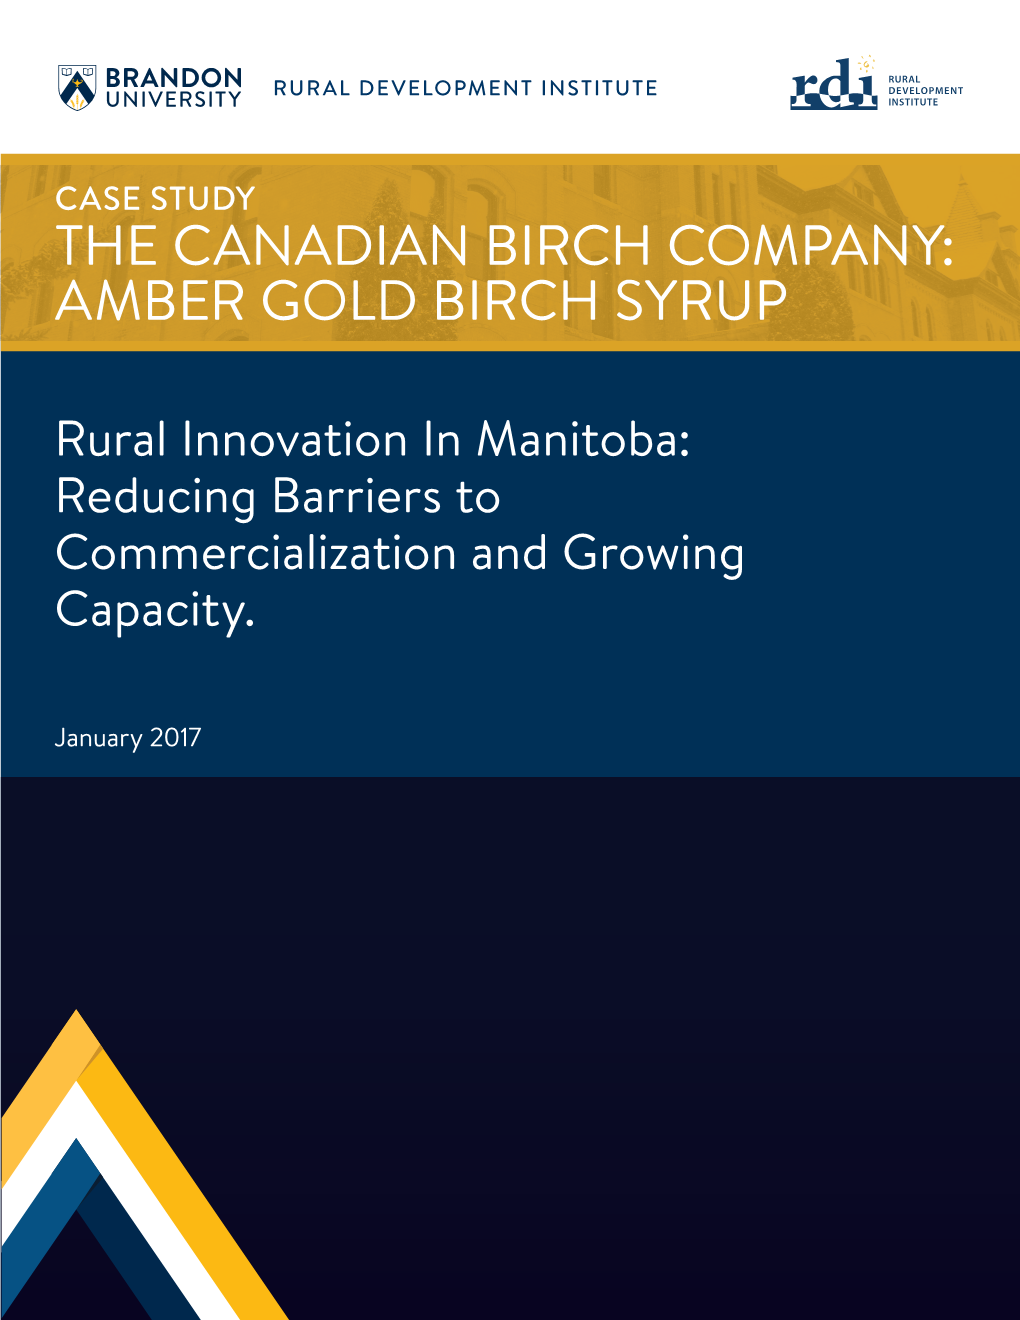 The Canadian Birch Company: Amber Gold Birch Syrup